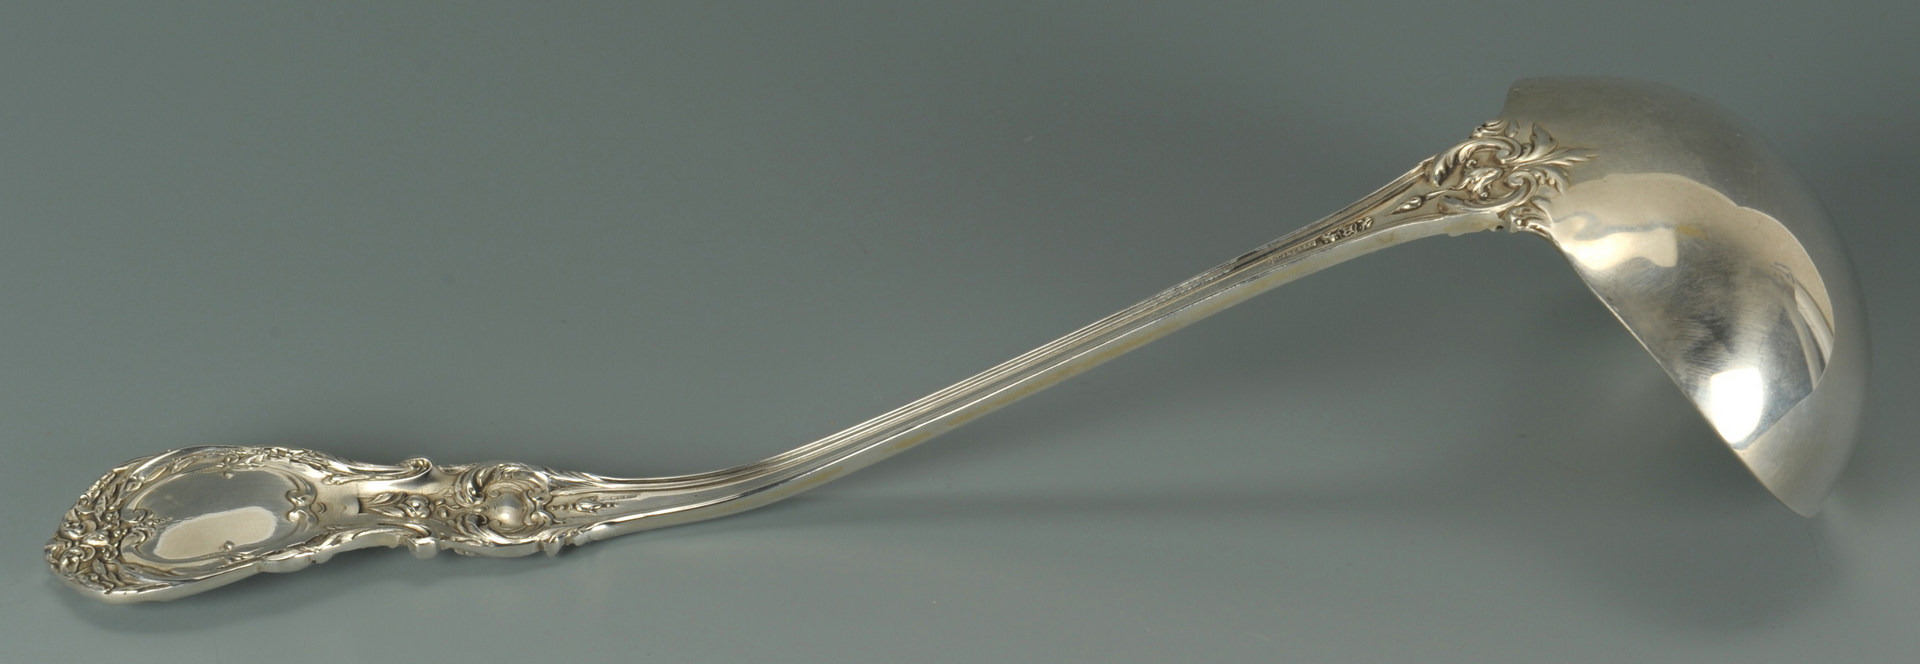 Lot 63: Reed & Barton Francis I Sterling Tray and Ladle